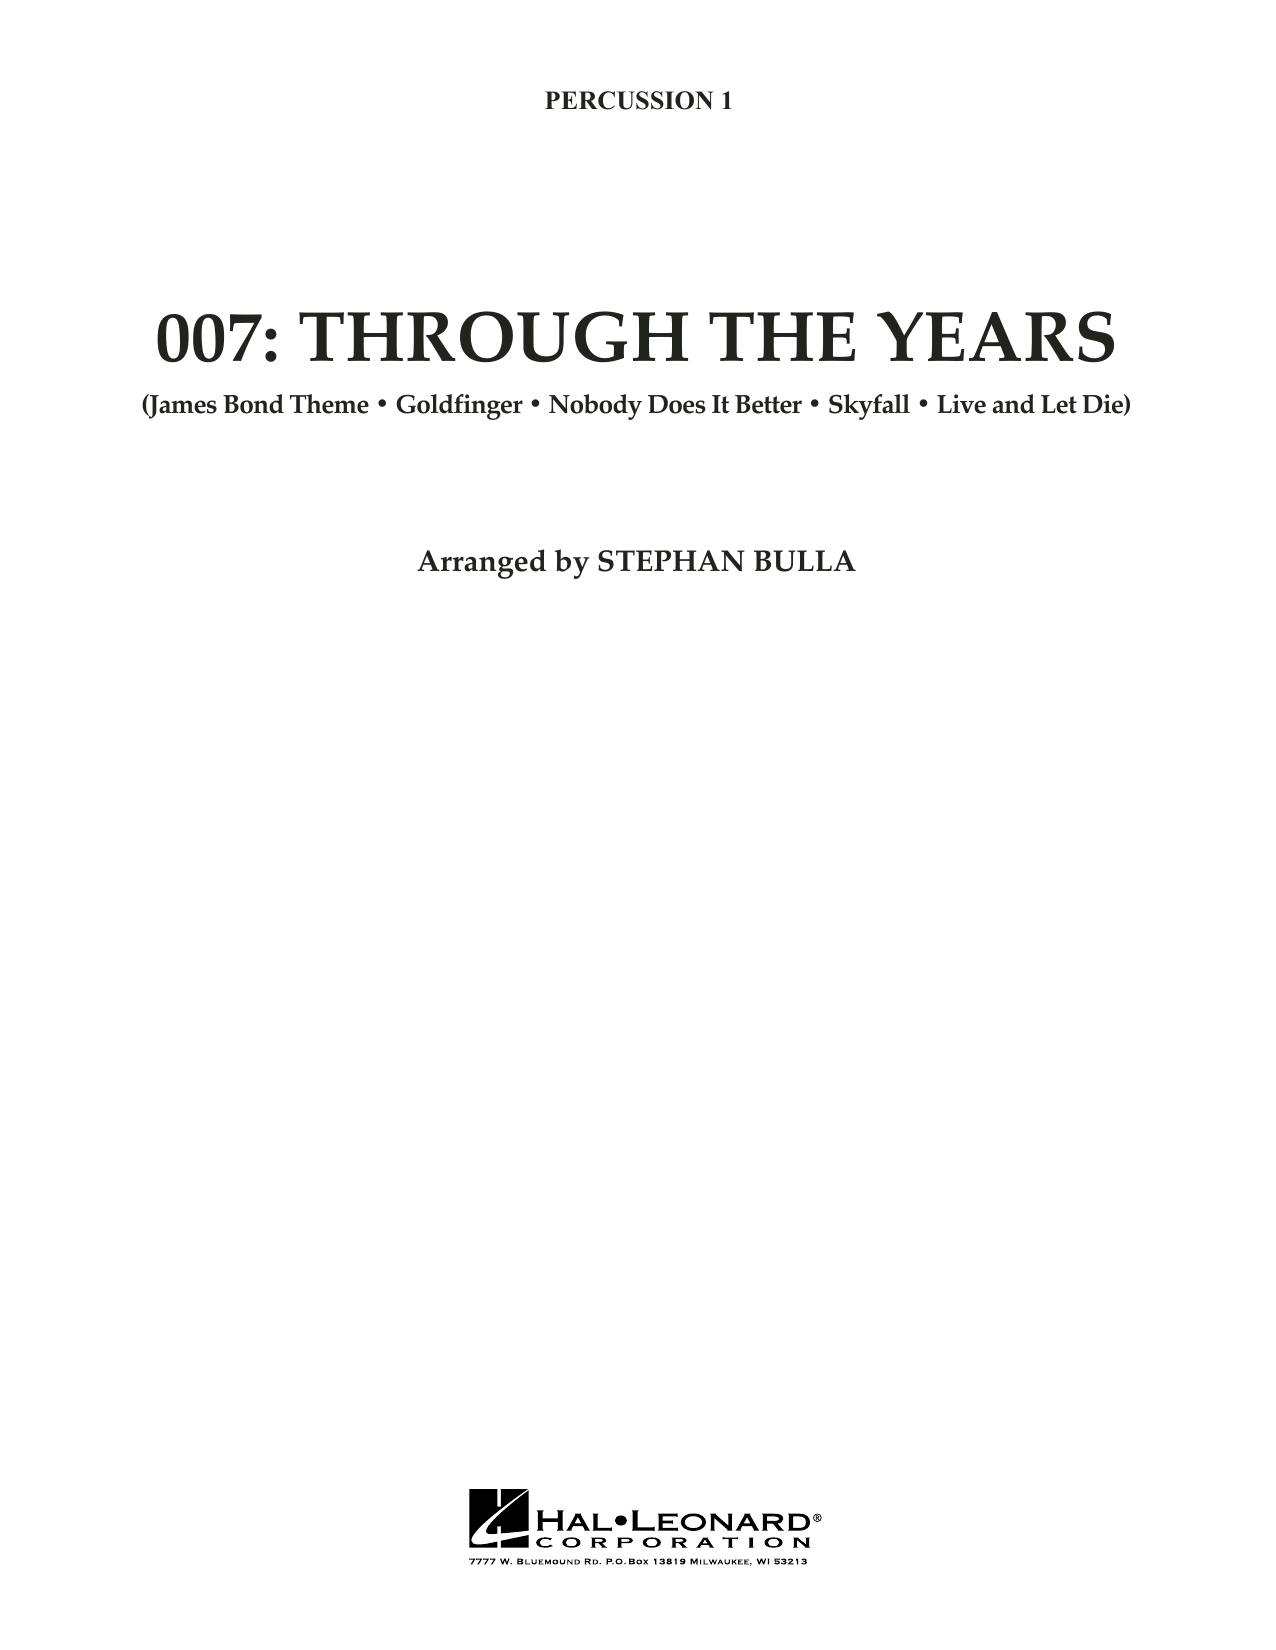 Stephen Bulla 007: Through The Years - Percussion 1 sheet music notes and chords arranged for Orchestra